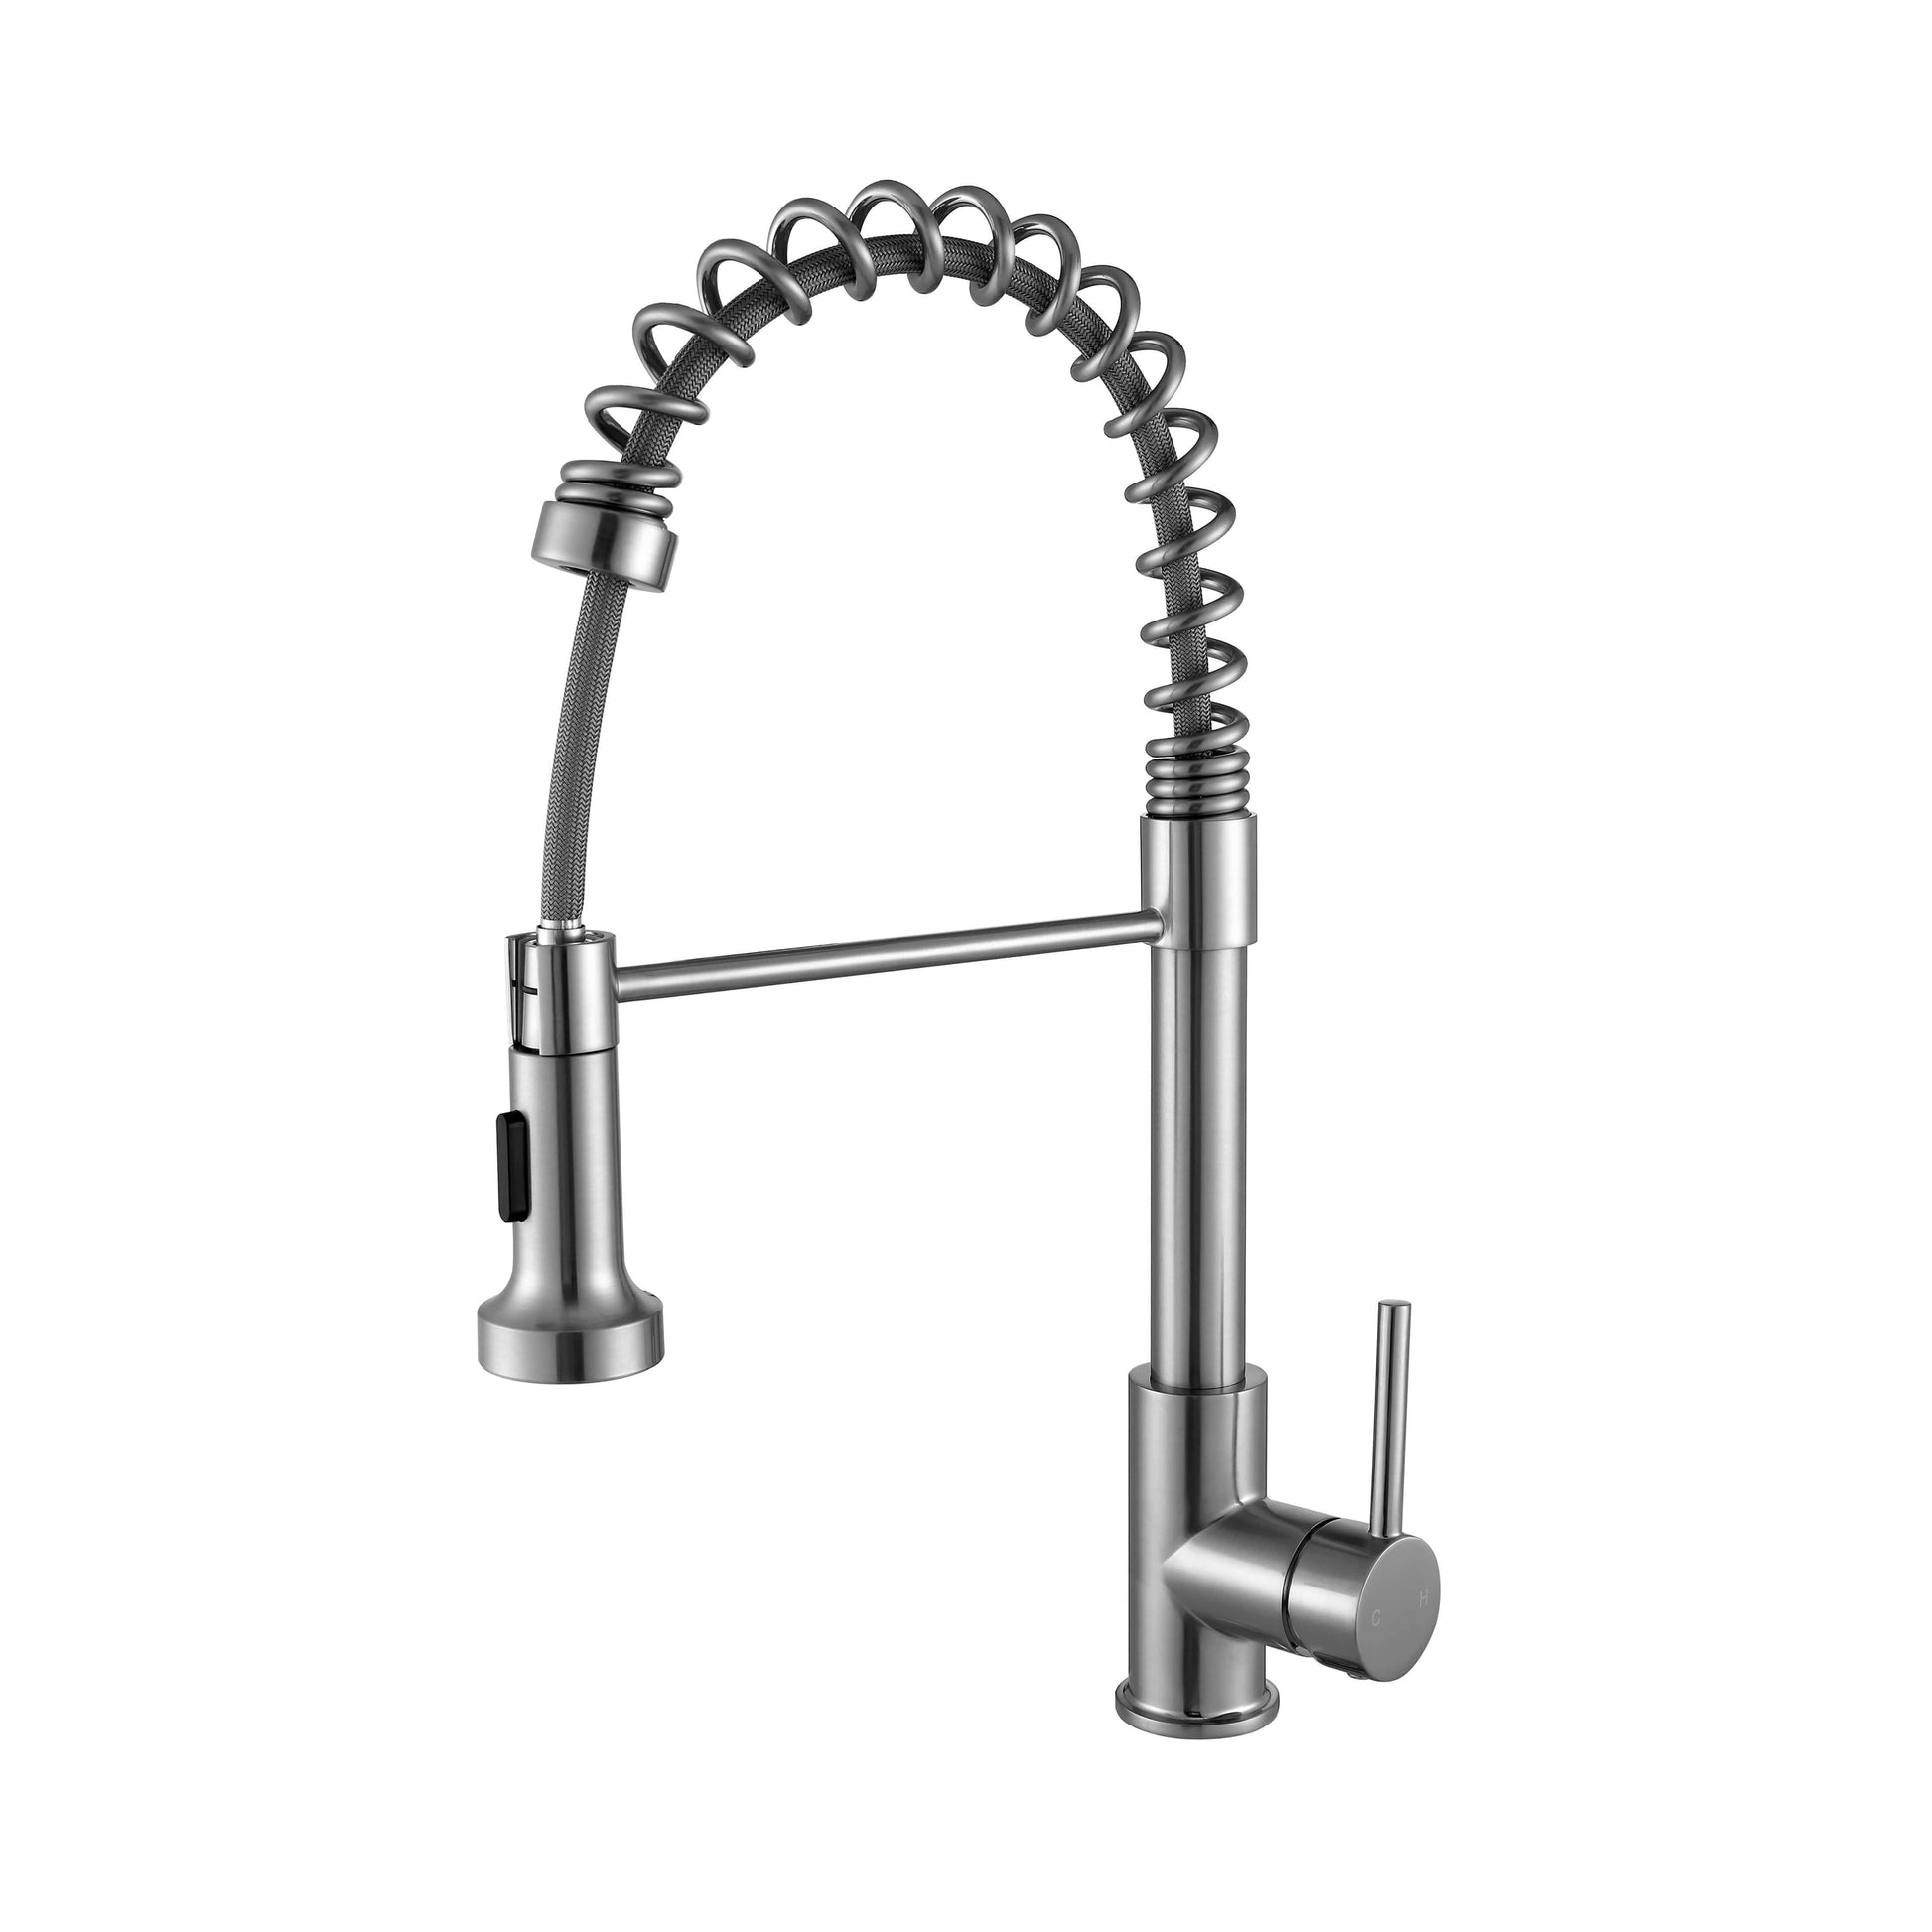 Lexora Faucet Brushed Nickle Lanuvio Brass Kitchen Faucet w/ Pull Out Sprayer